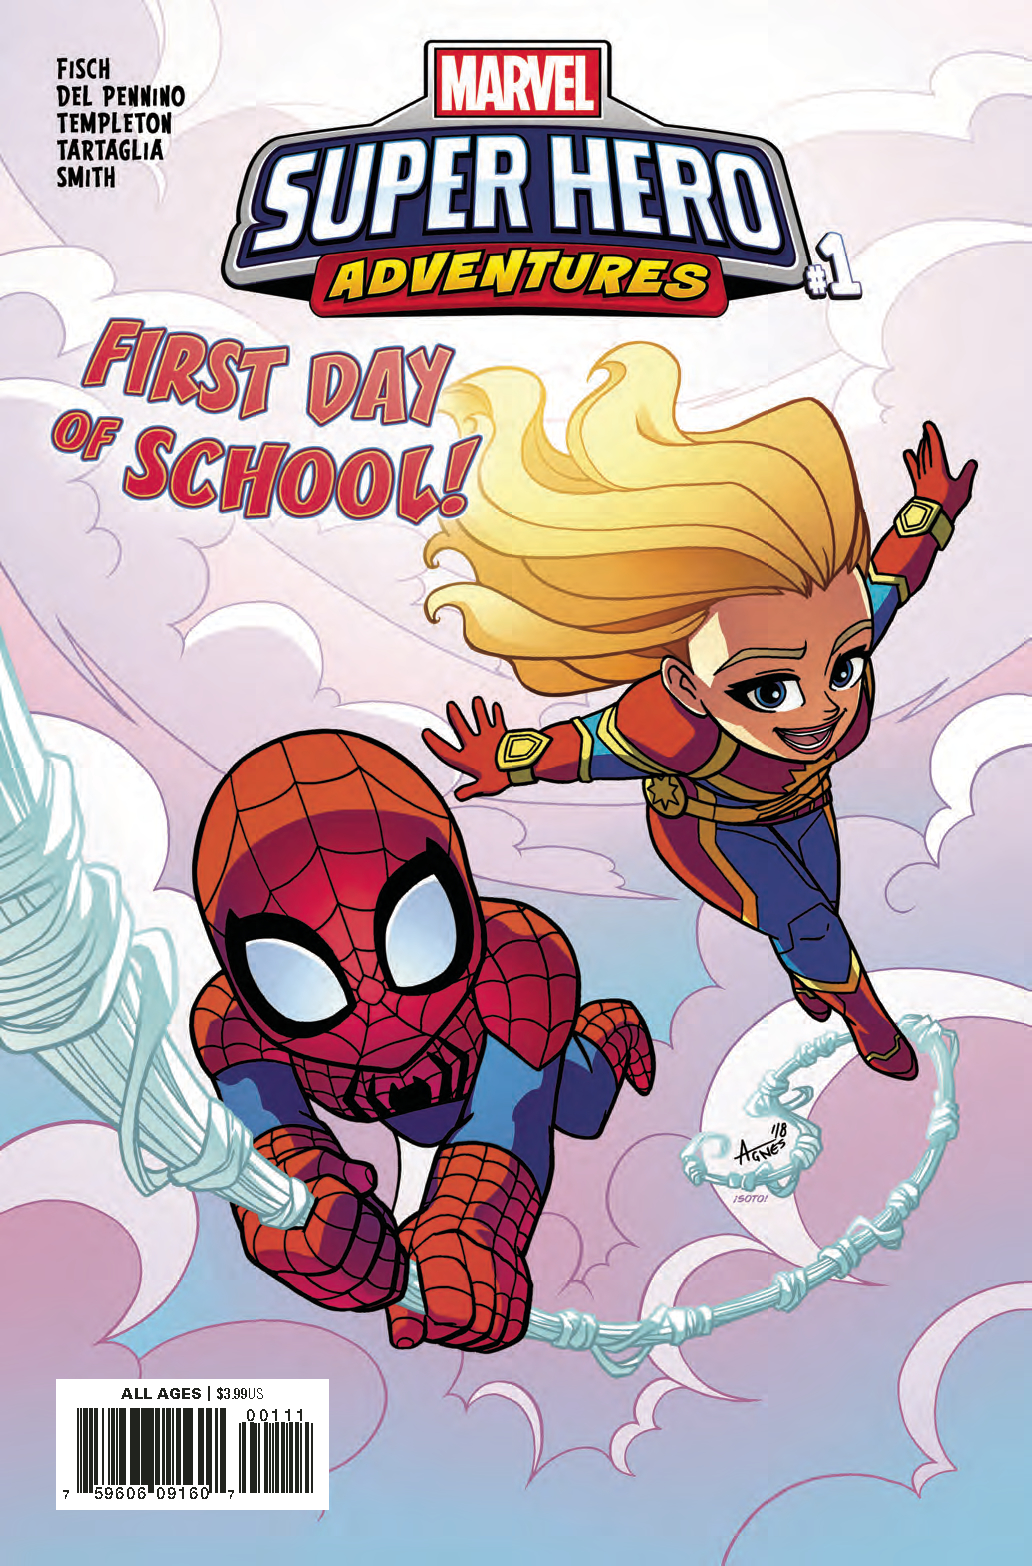 MSH ADVENTURES CAPTAIN MARVEL FIRST DAY OF SCHOOL #1